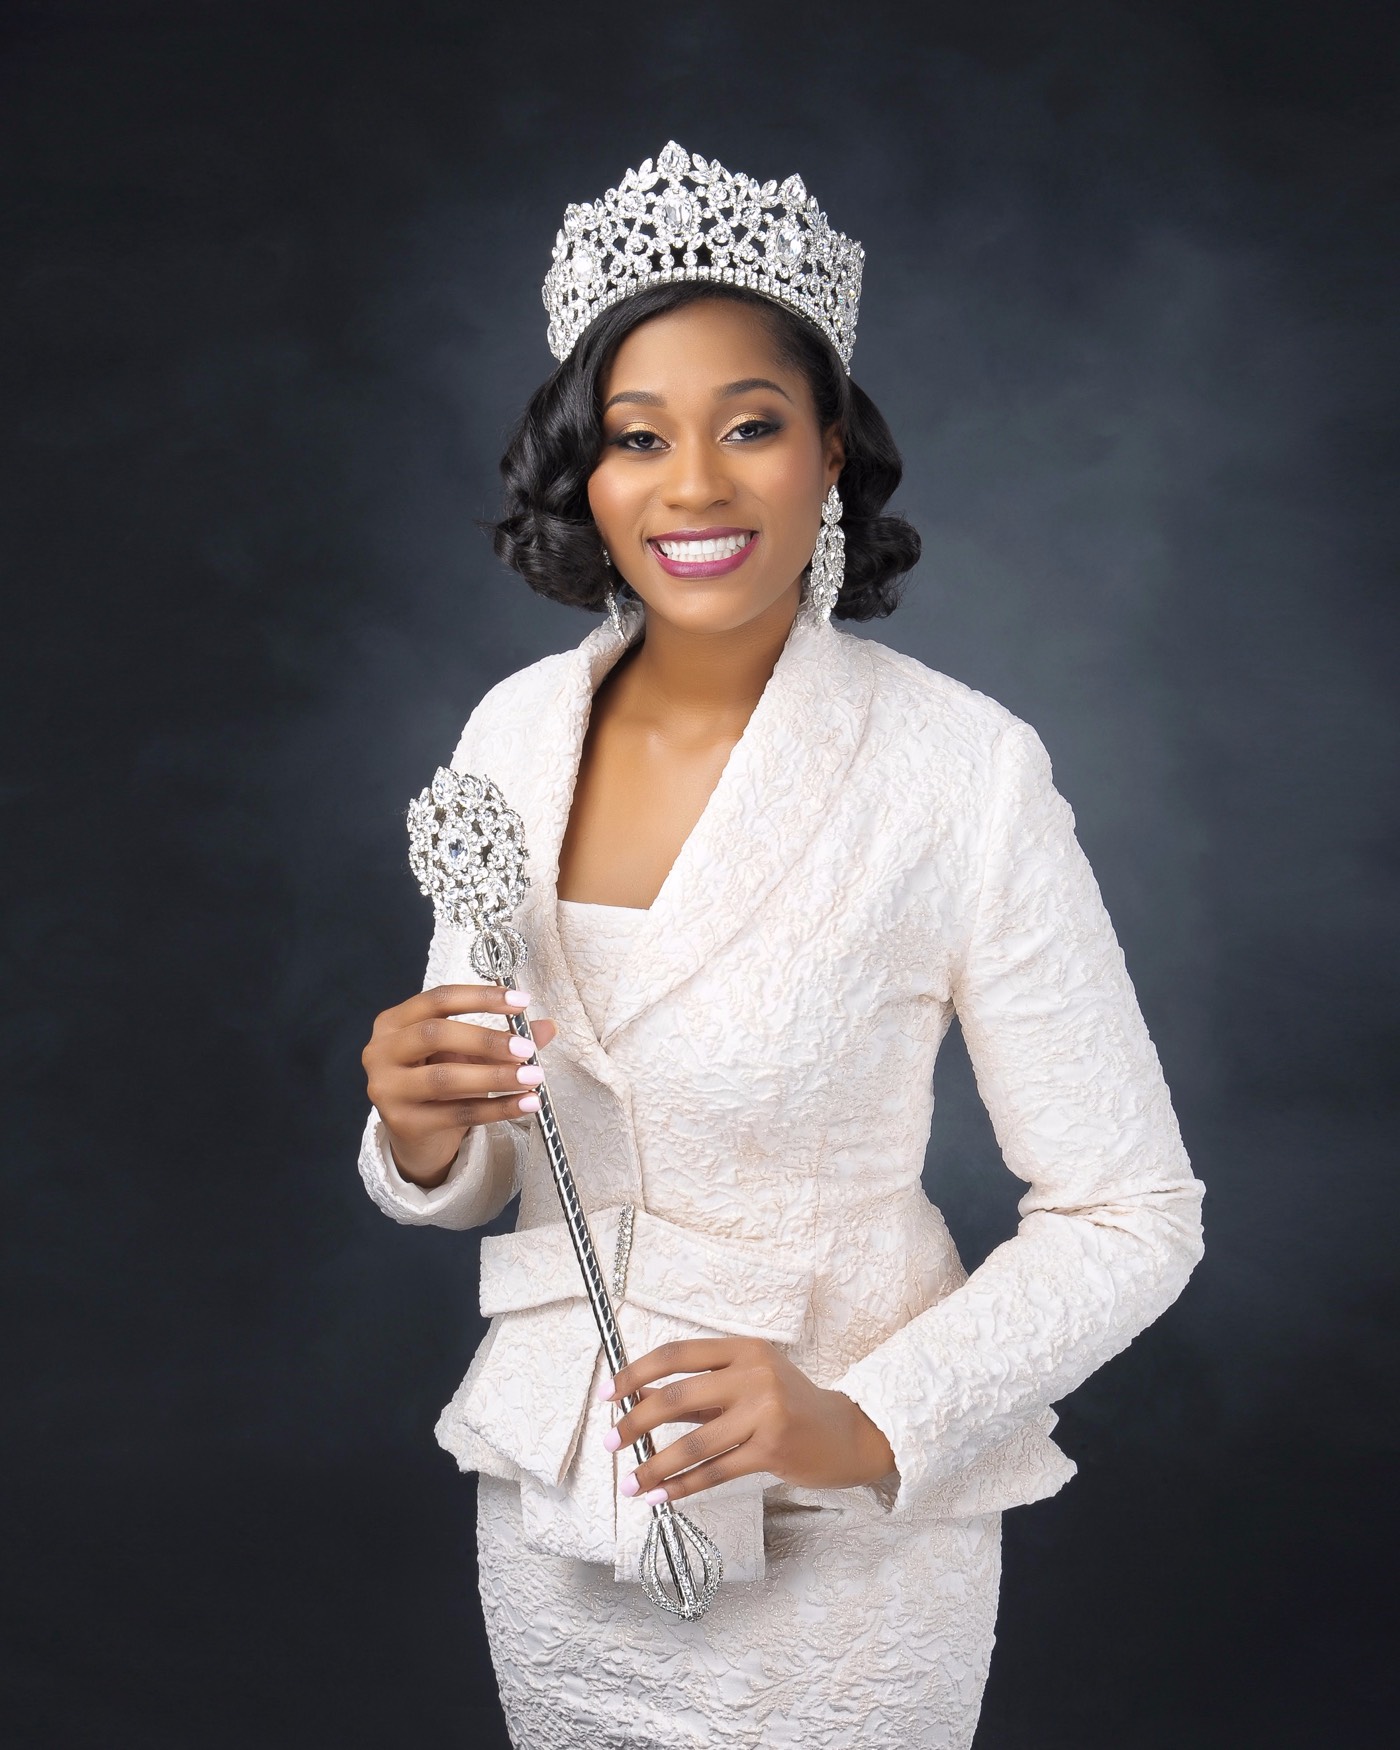 LSU student Kailyn Rainey is the 2019 Zulu Queen